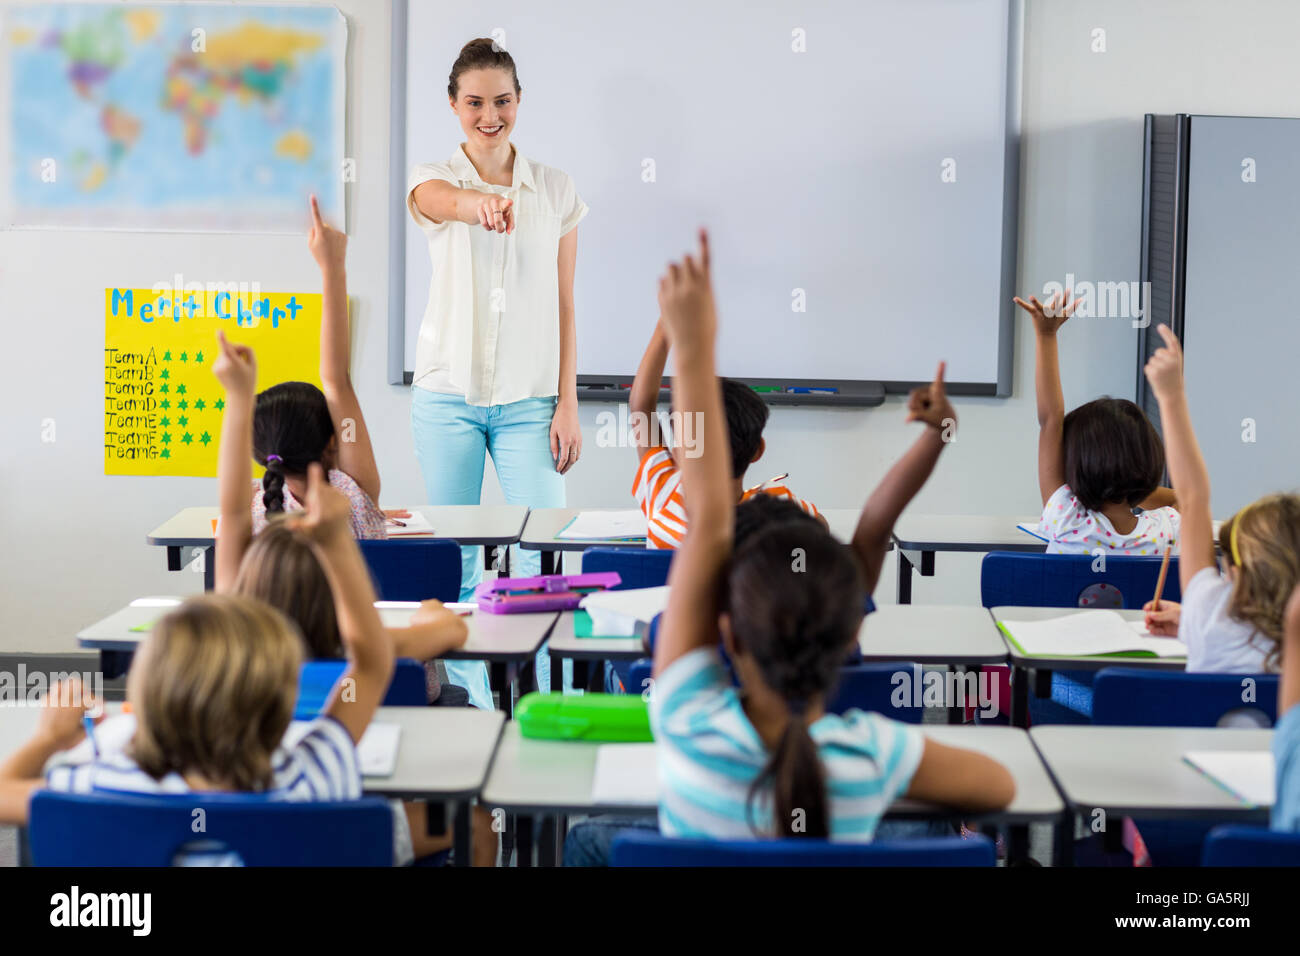 Teacher pointing students with raised hands Stock Photo